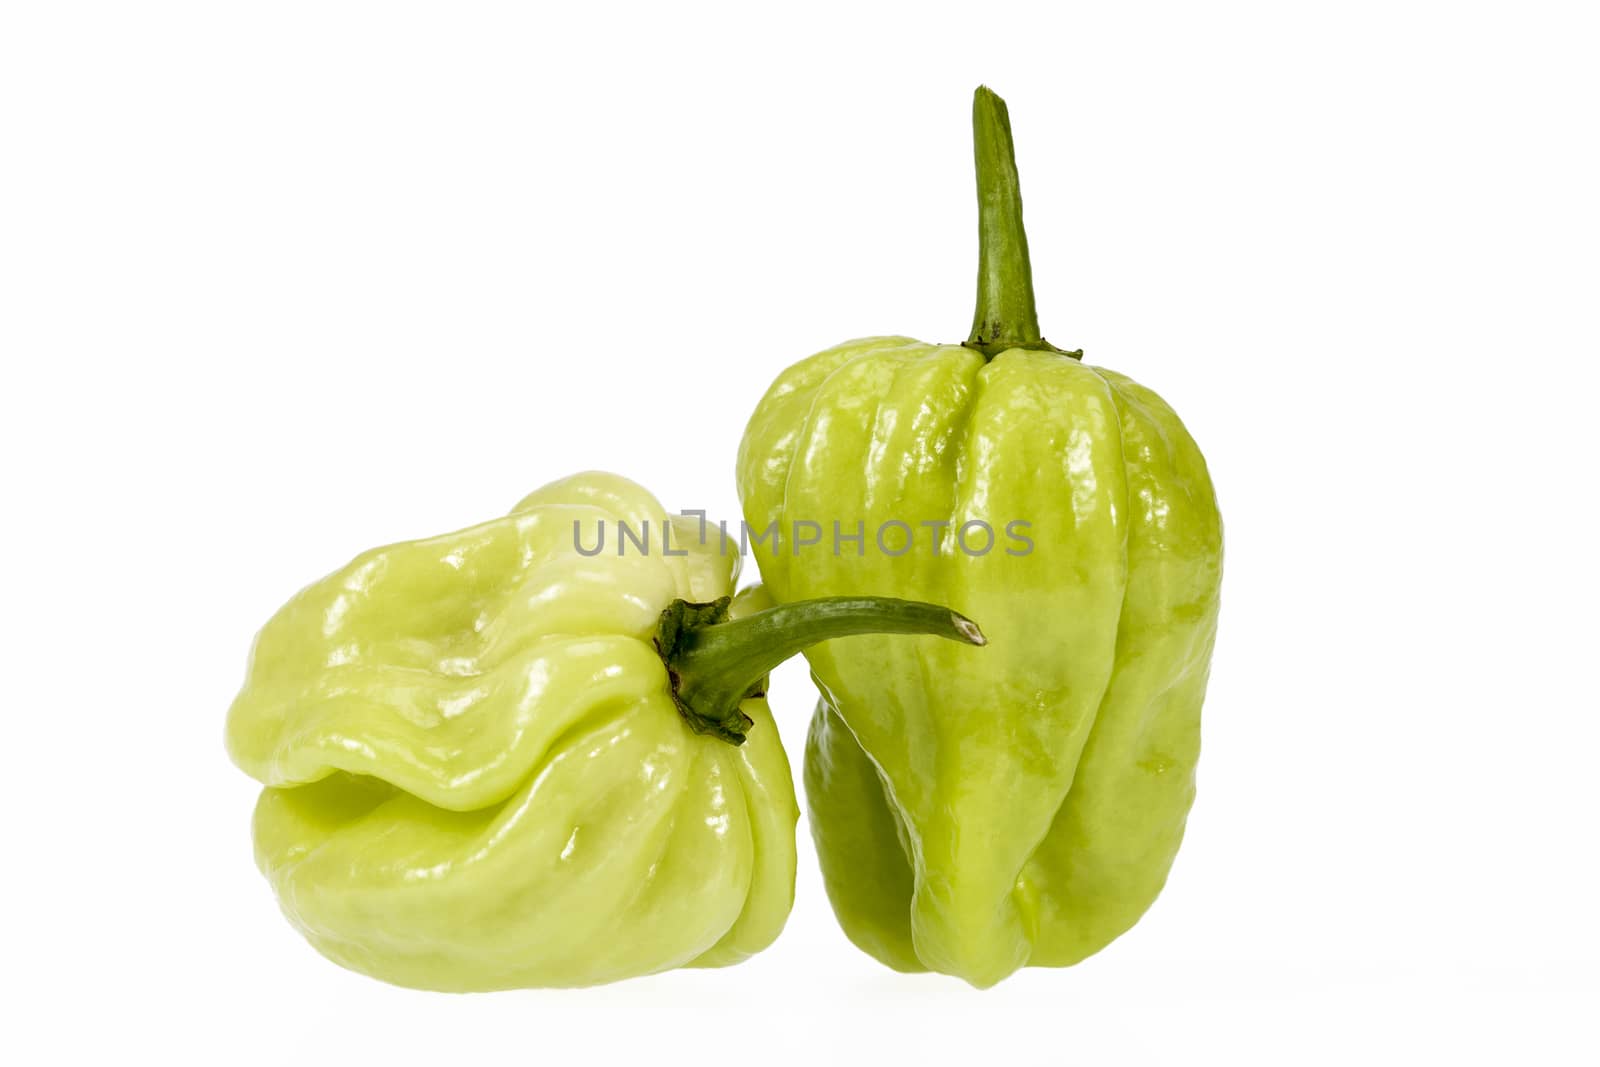 Vegetable of small  green chili pepper habanero on white background by mychadre77